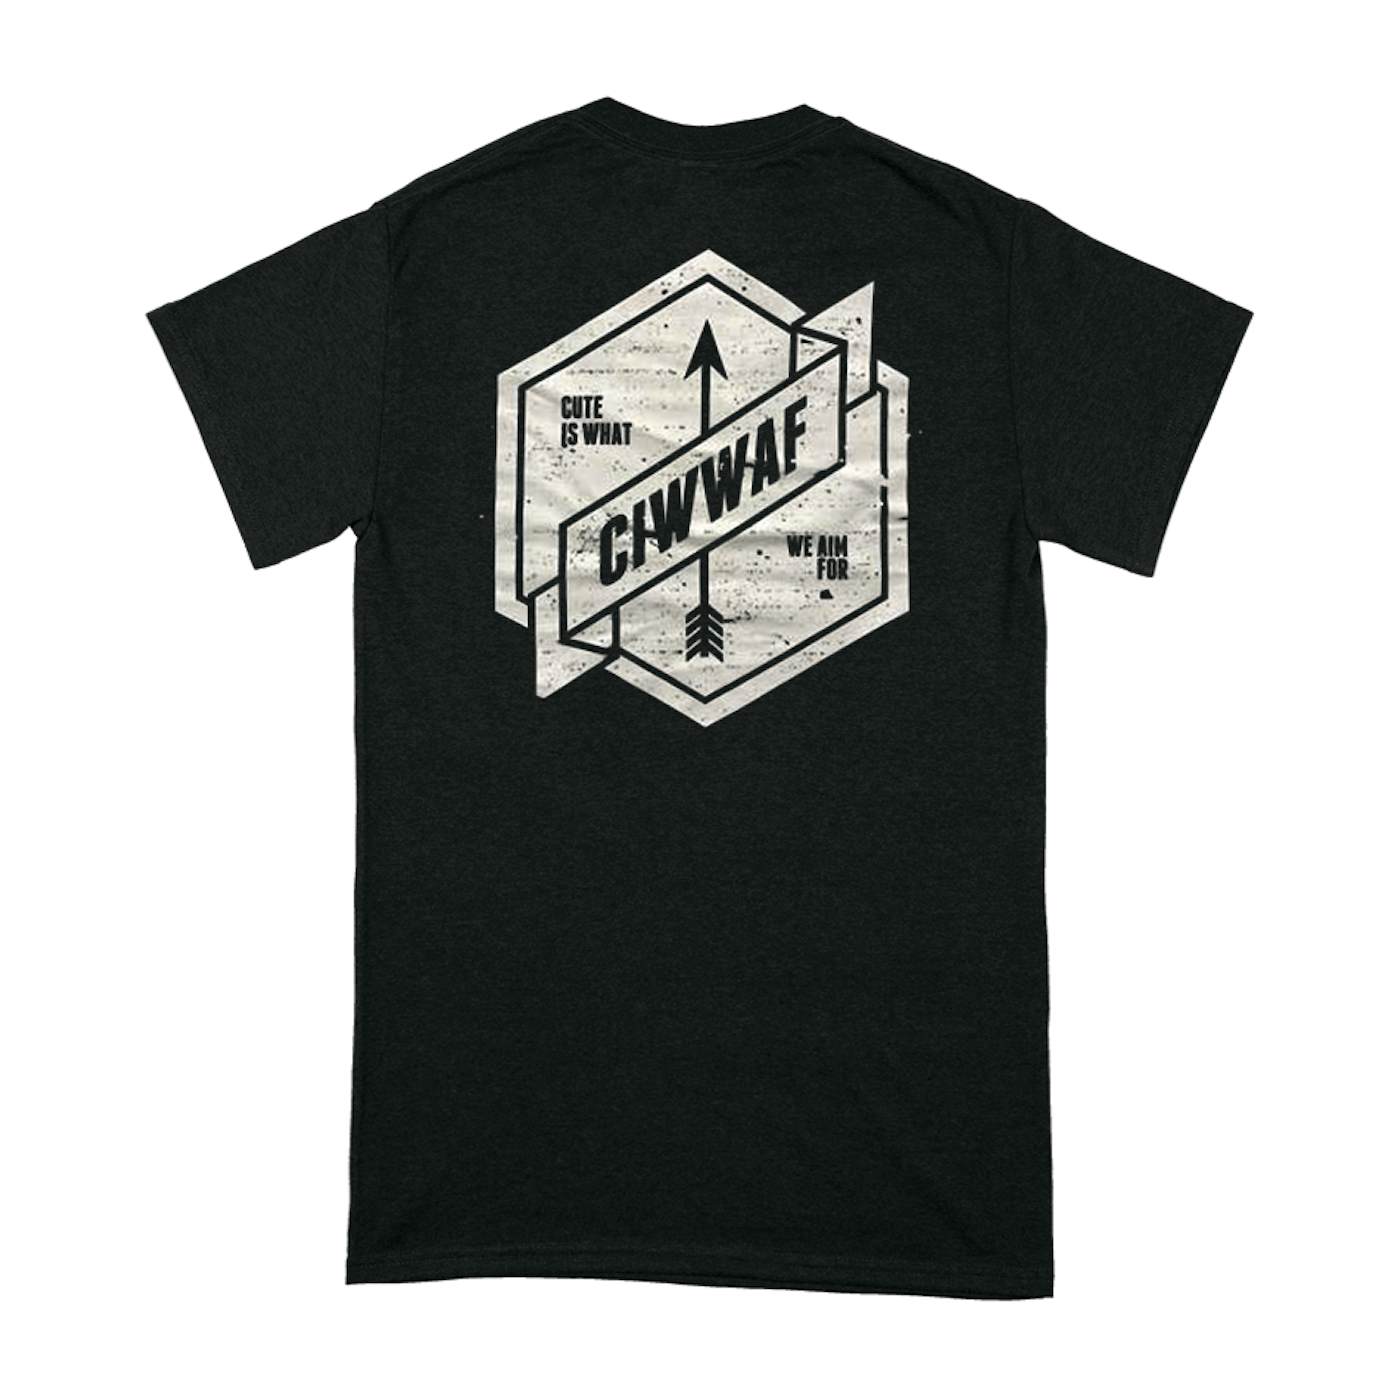 Cute Is What We Aim For "Arrow" T-Shirt